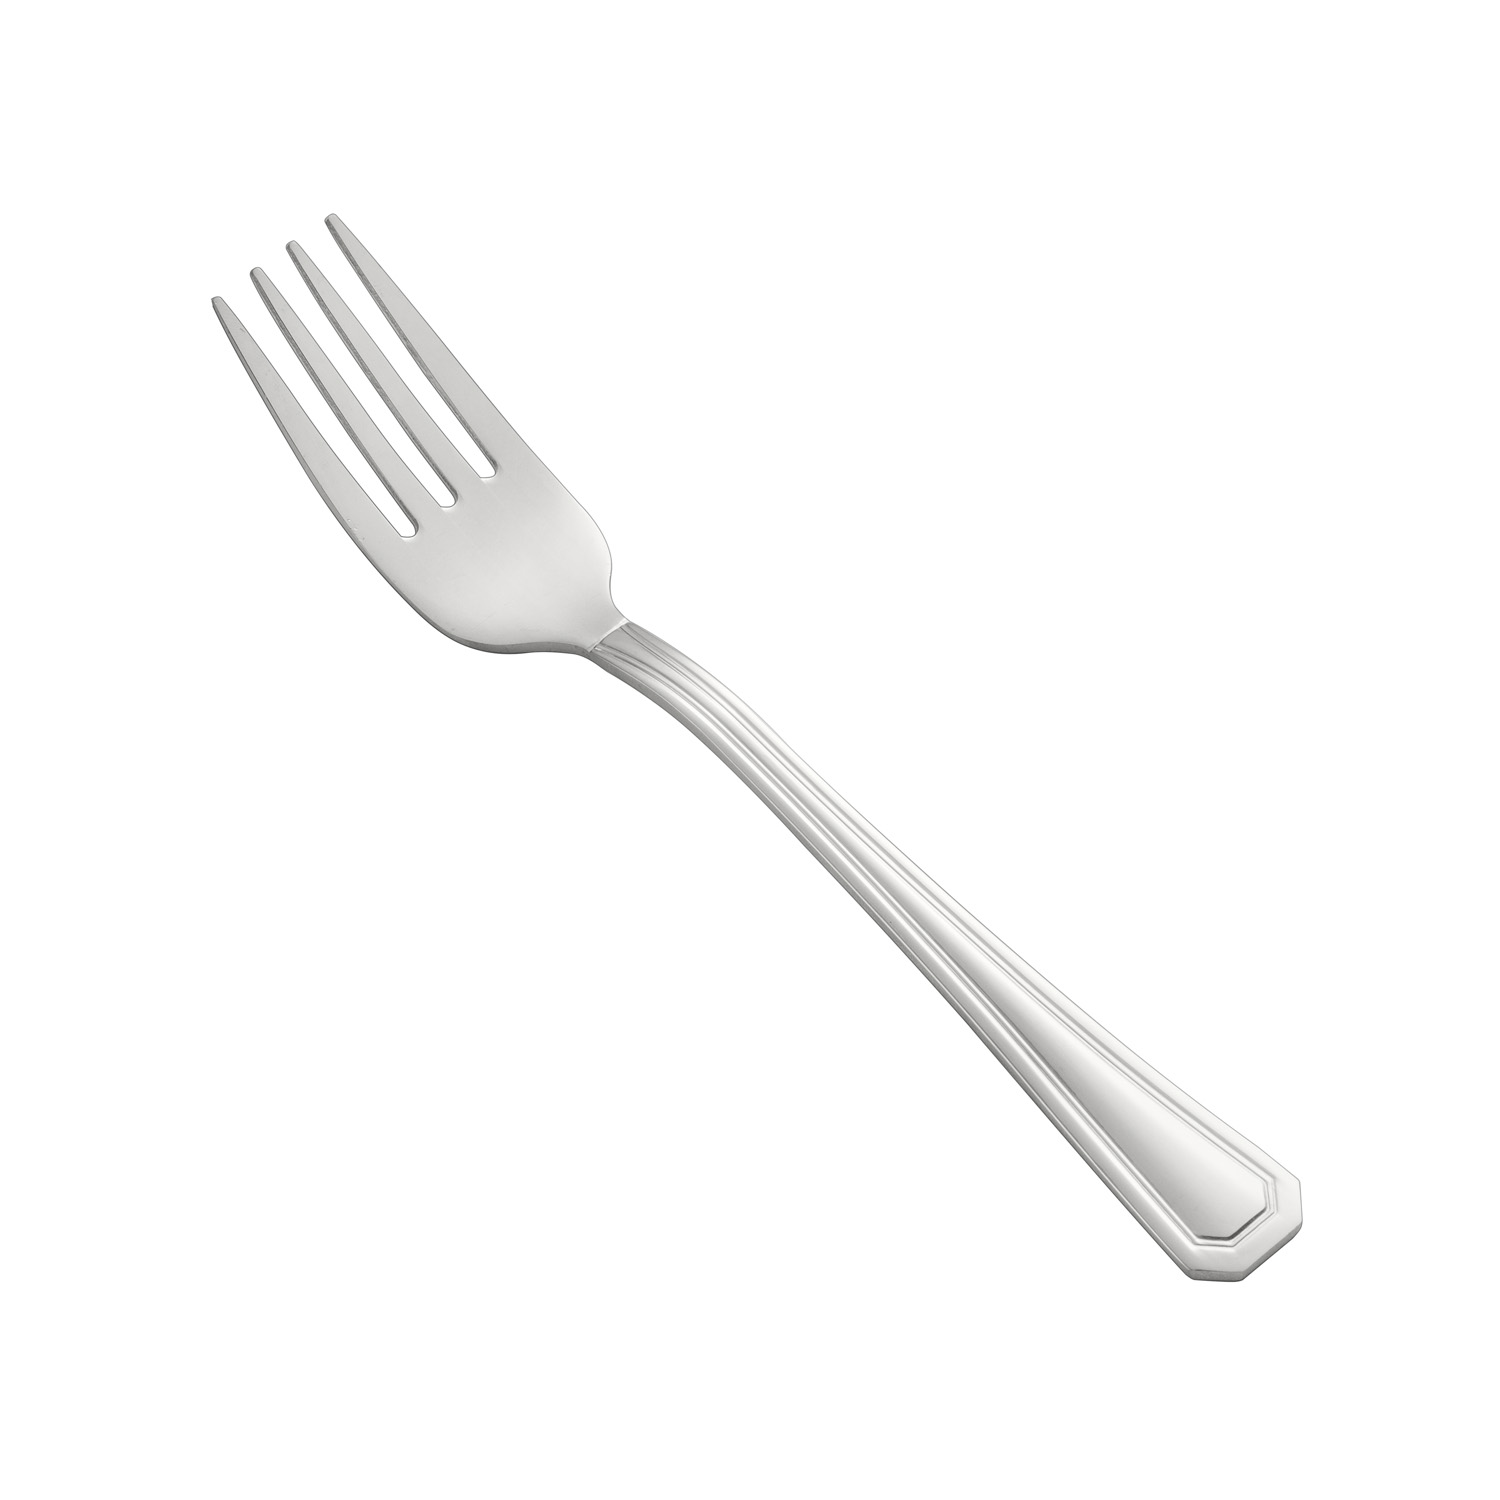 CAC China 8006-06 Lux Salad Fork, Extra Heavyweight 18/8, 6 7/8"